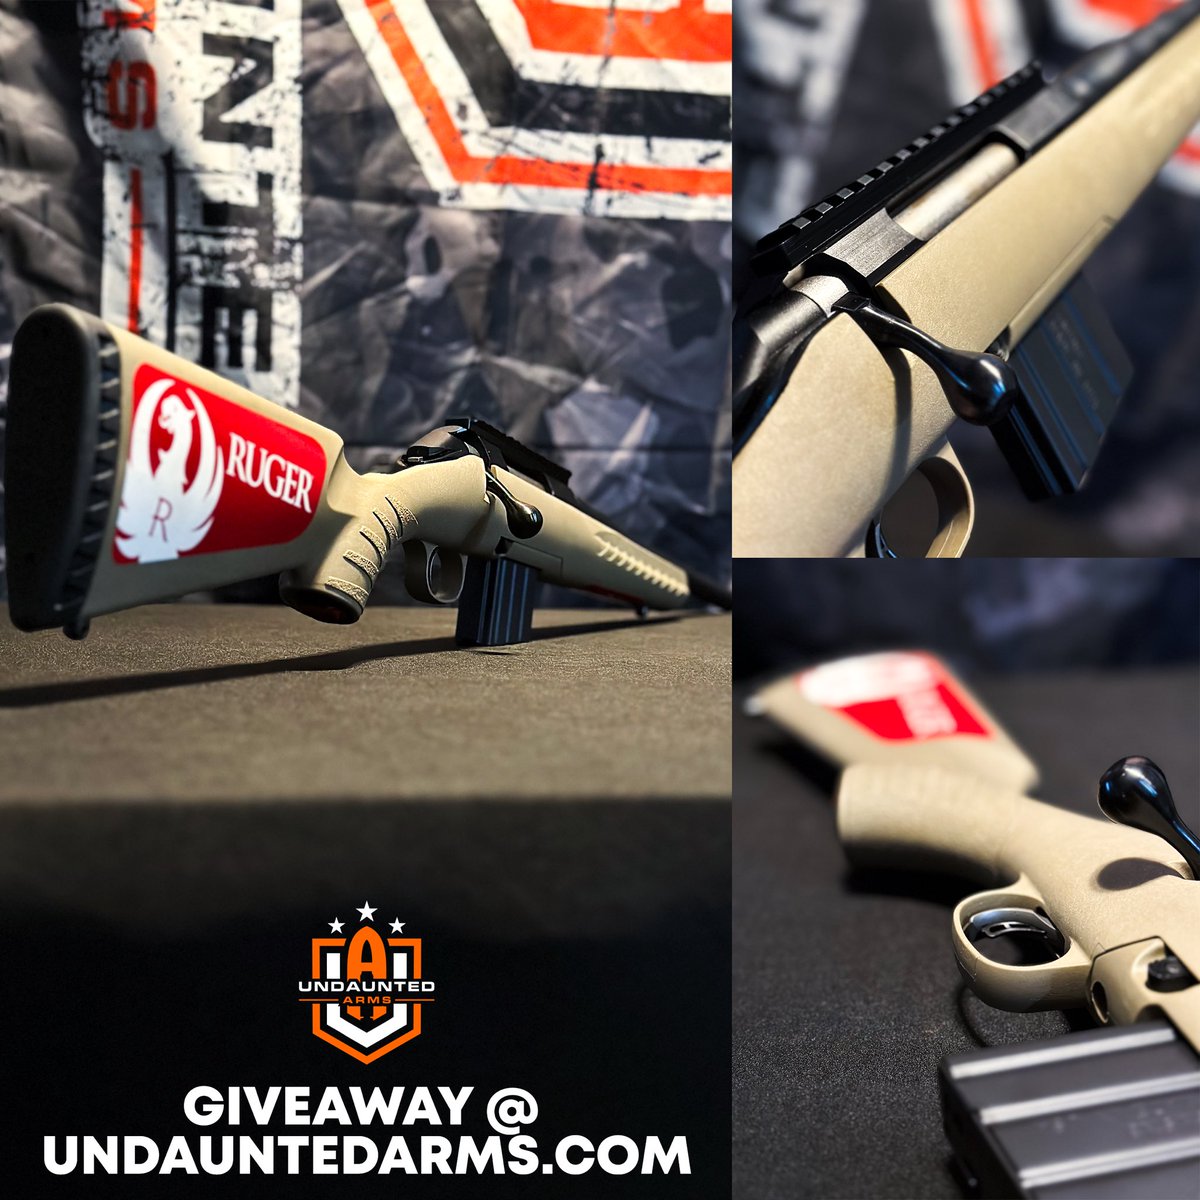 Don’t miss our kickass giveaway! Link in bio #guns #giveaway #2a #merica #progun